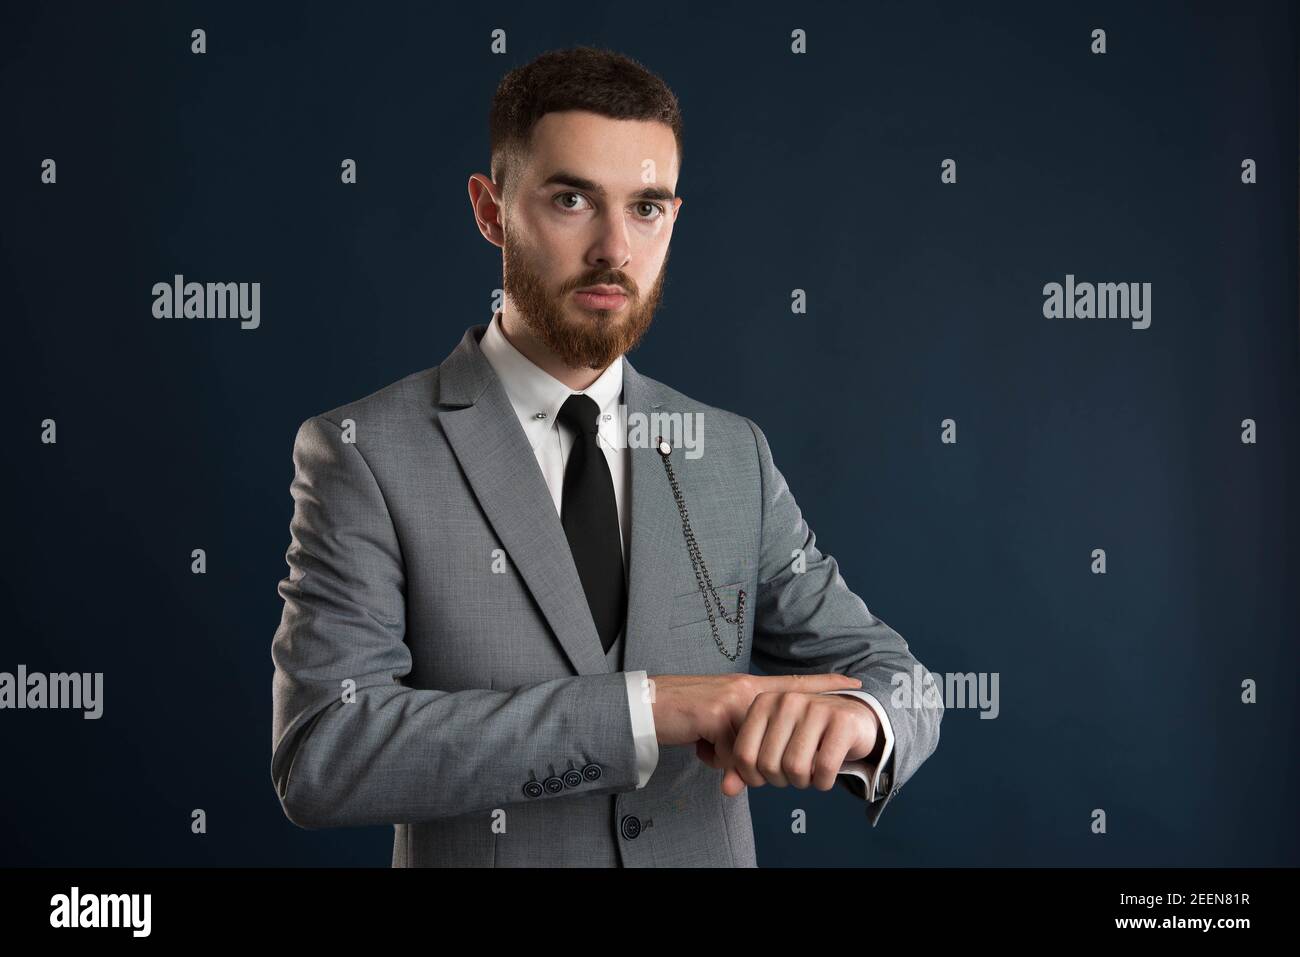 Upset young businessman checking the time wearing a grey suit and black tie Stock Photo